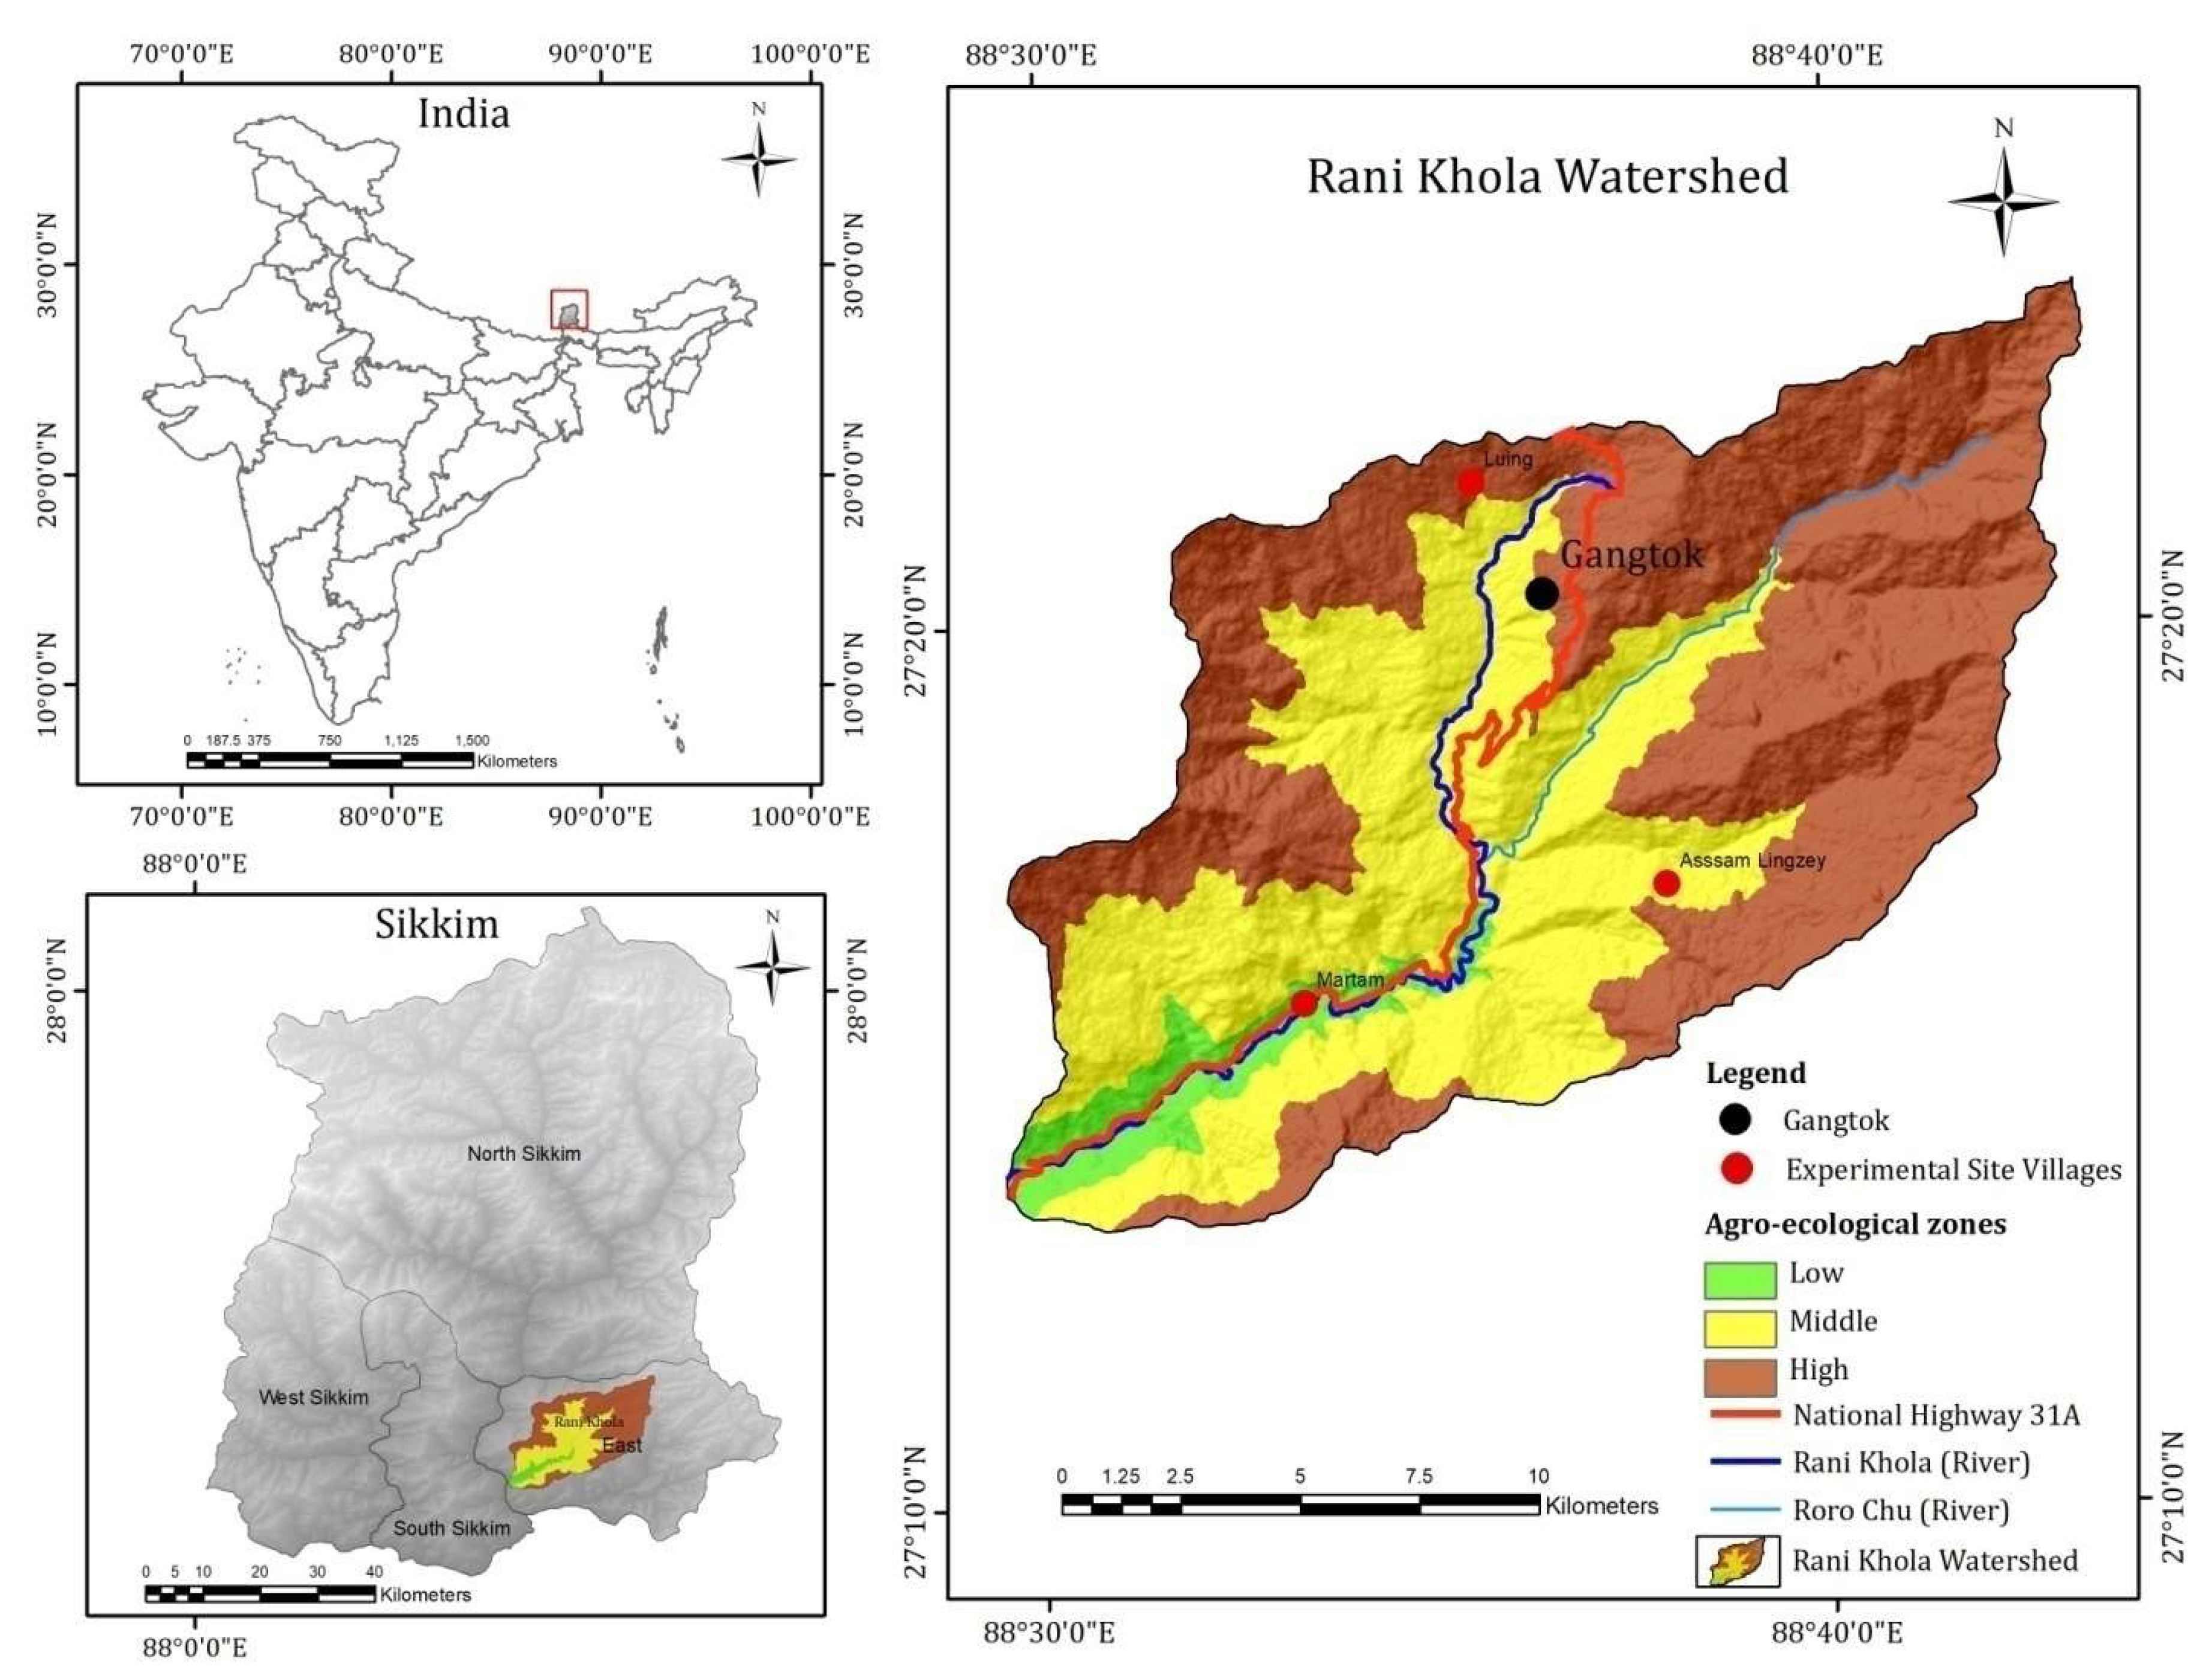 Intensified cropping reduces soil erosion and improves rainfall  partitioning and soil properties in the marginal land of the Indian  Himalayas - ScienceDirect